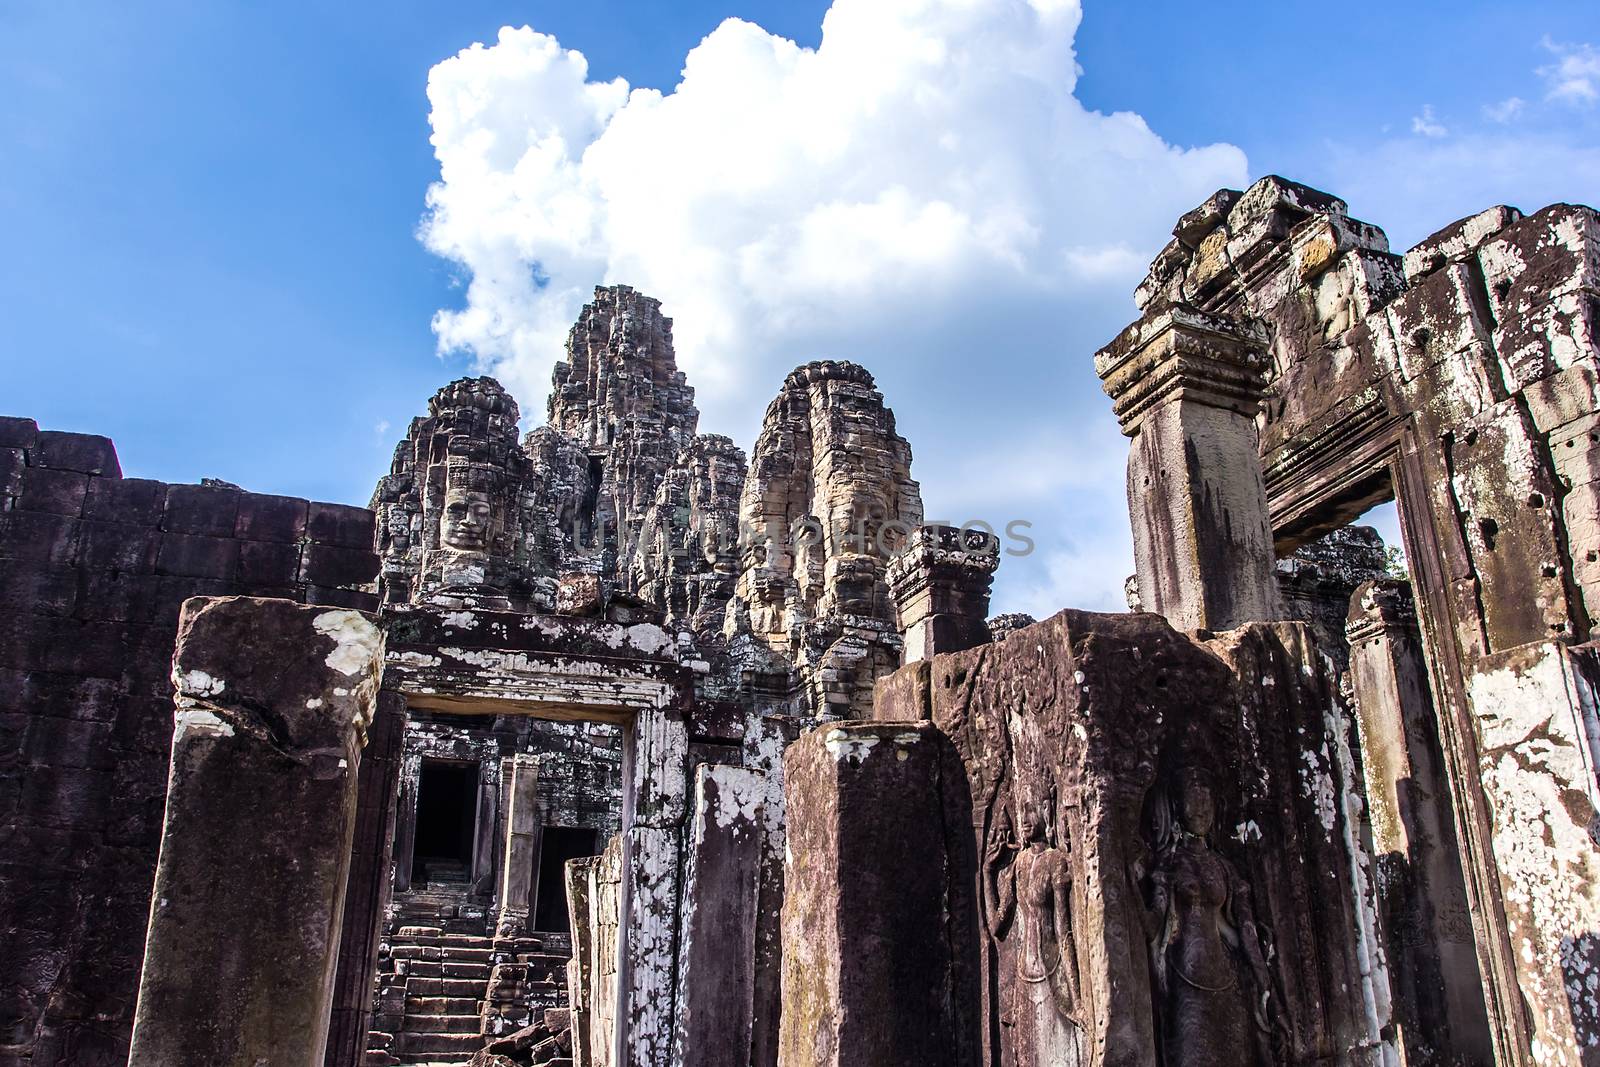 Bayon Temple in Angkor Thom, Cambodia by kannapon